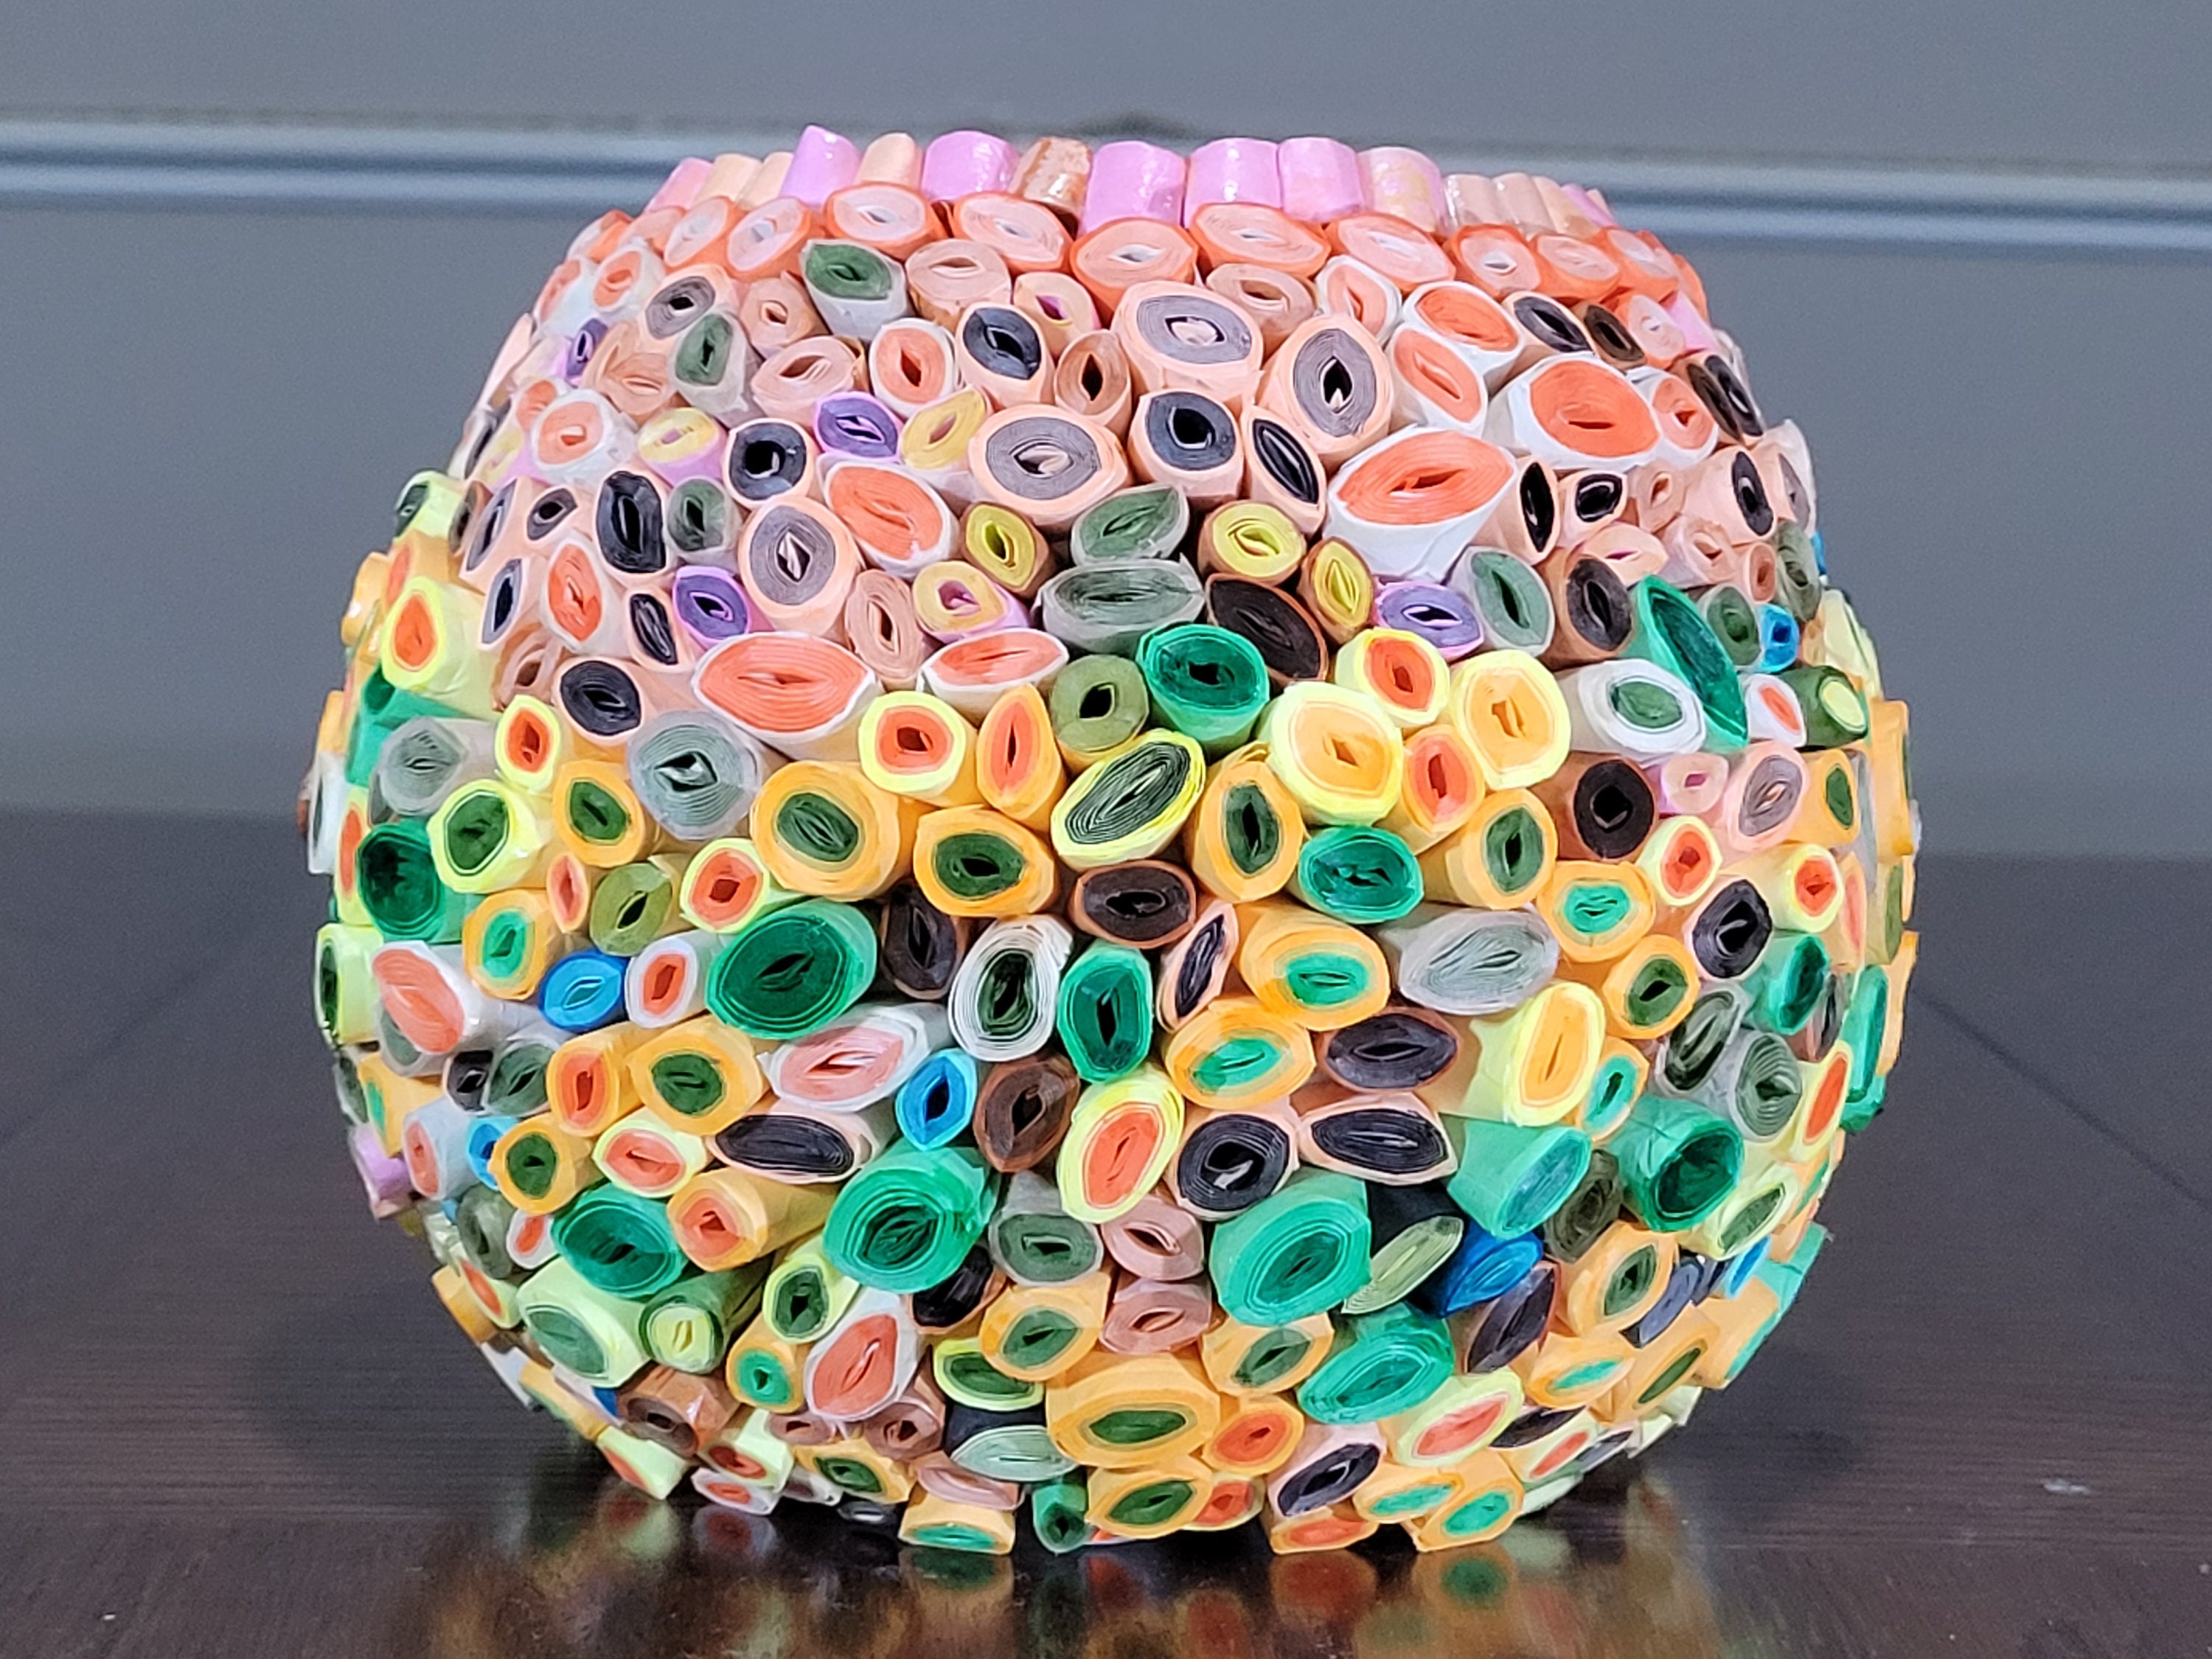 Colored vase made from paper, quilling paper vase, paper roll vase, unique  vase, paper roll art, paper art – ZAD Creation